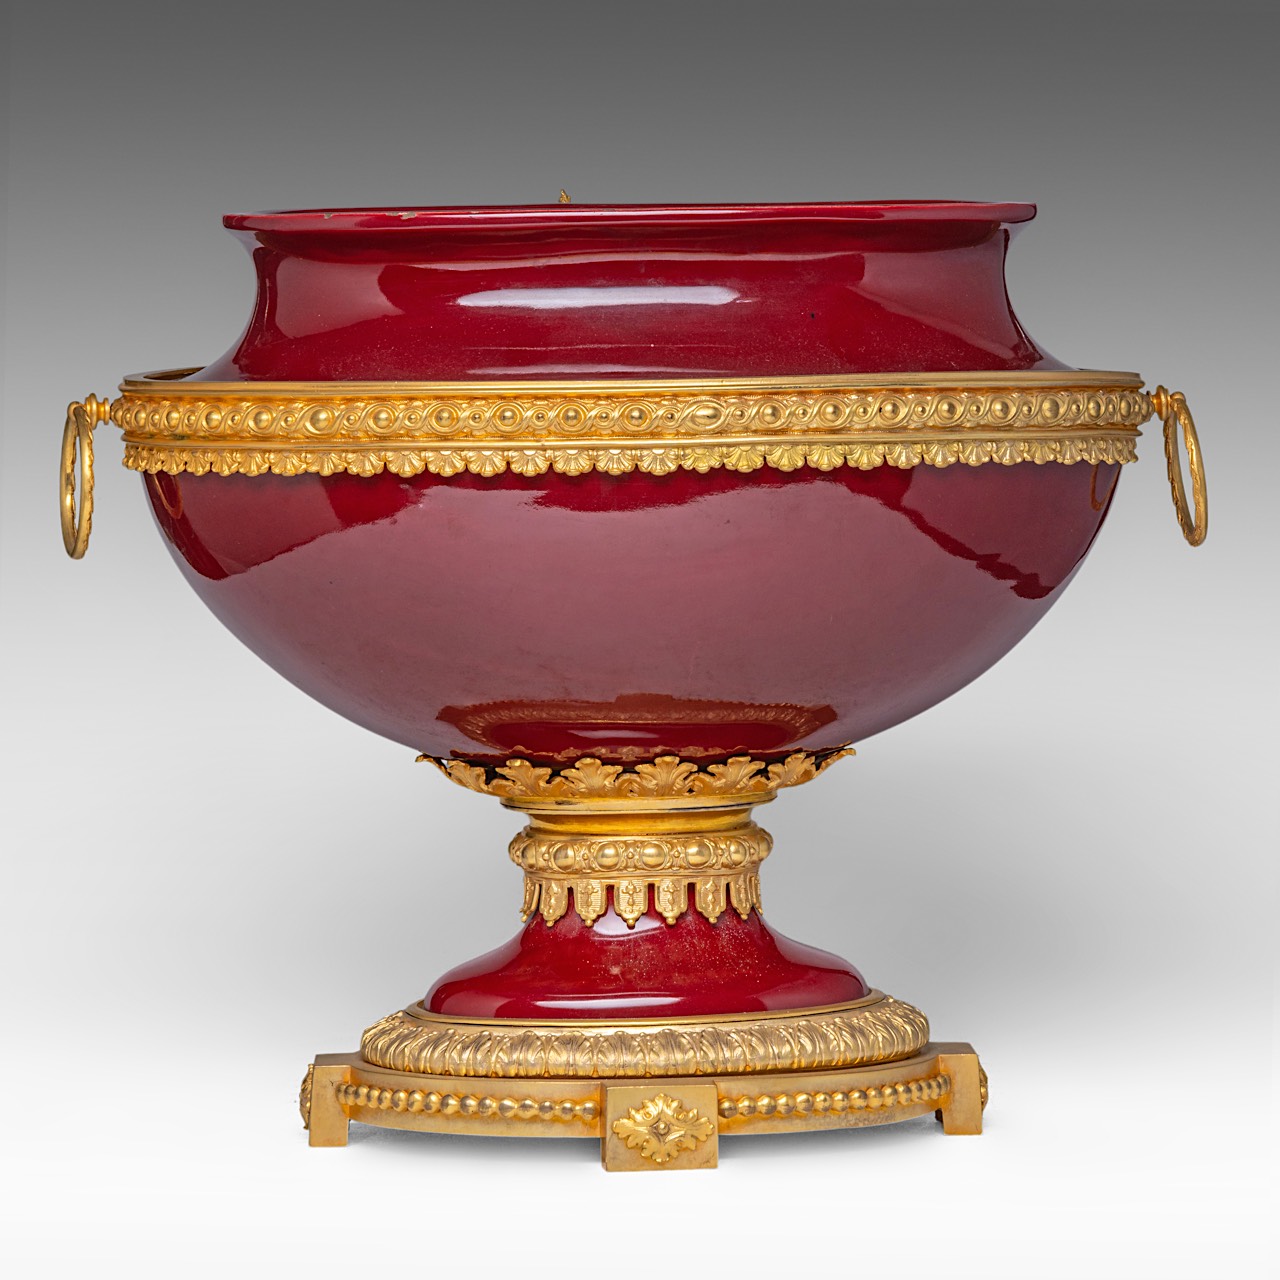 A Neoclassical 'sang de boeuf' glazed porcelain plant stand with gilt bronze mounts, H 37 - W 40 cm - Image 3 of 6